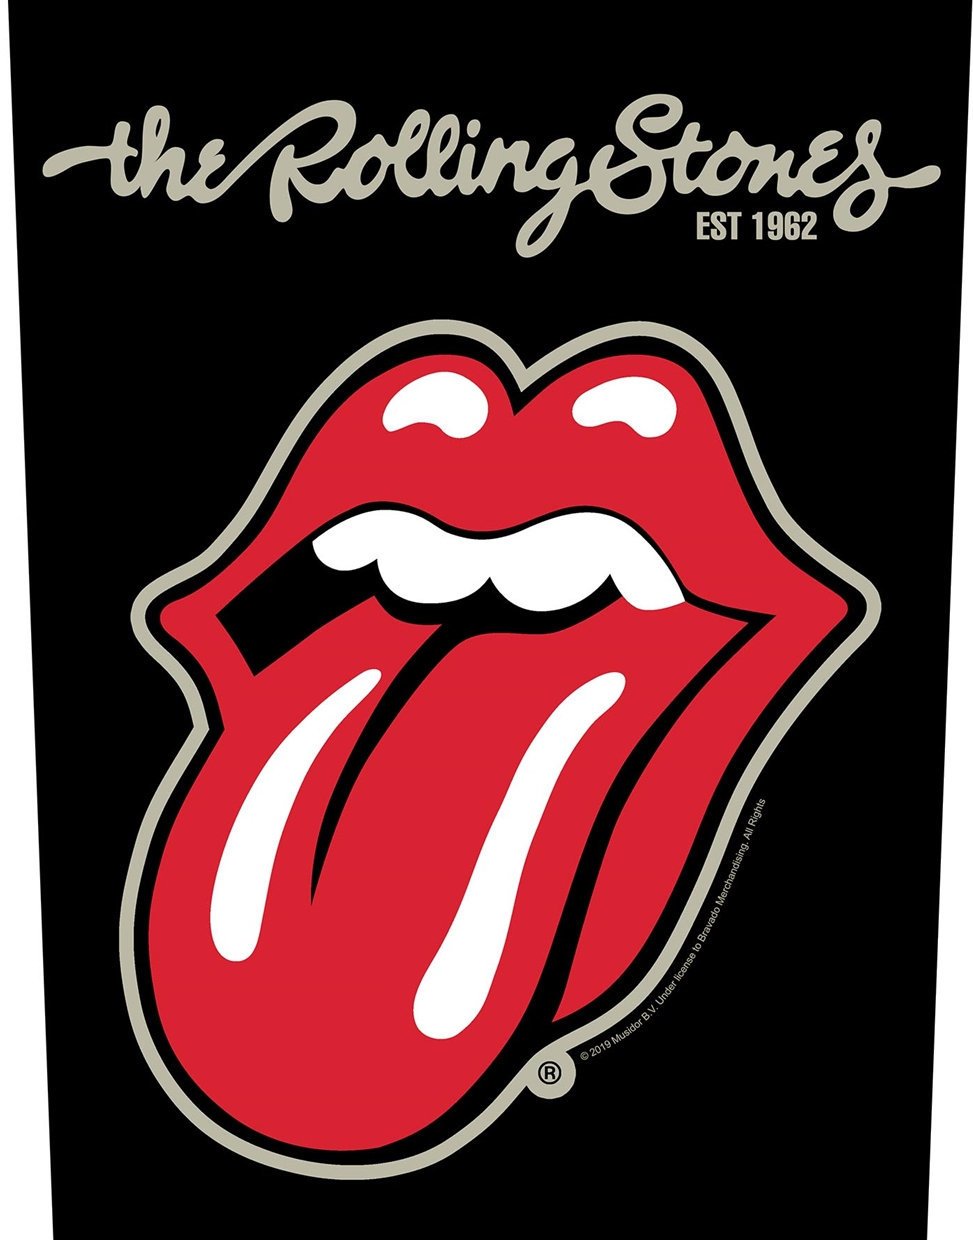 Patch-uri The Rolling Stones Plastered Tongue Patch-uri